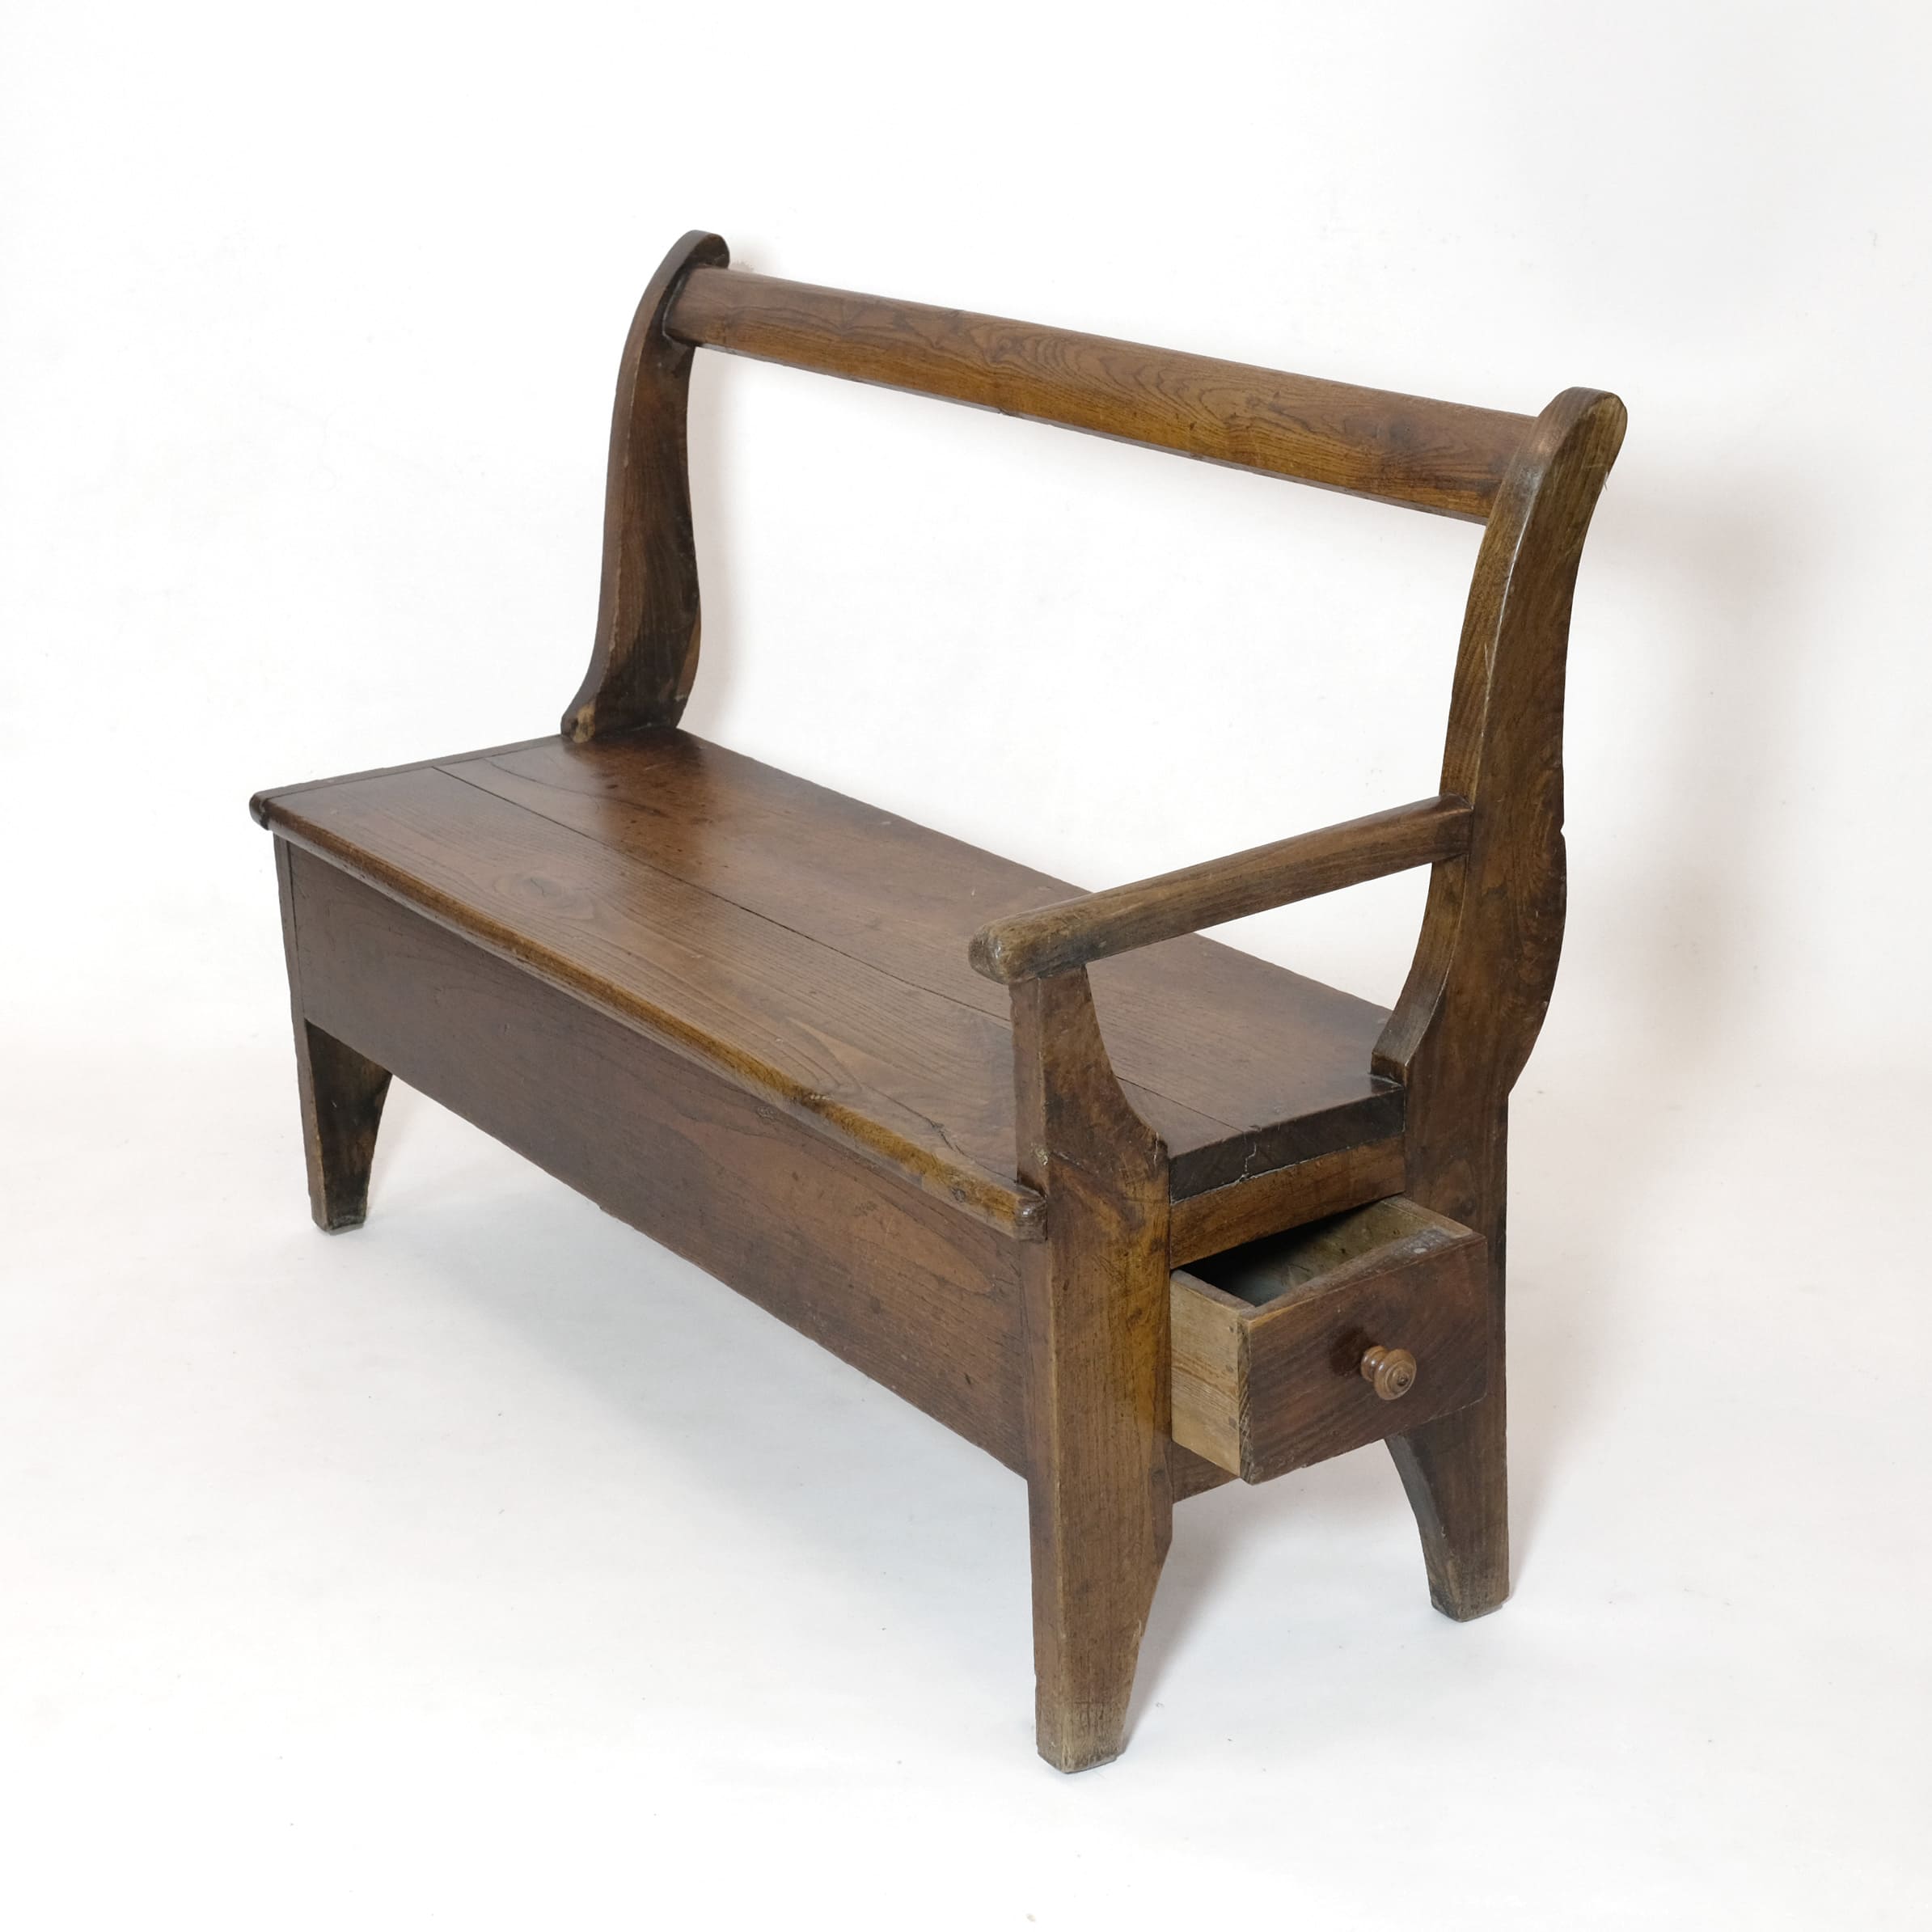 Handcrafted wooden bench with armrest and drawer on the left.